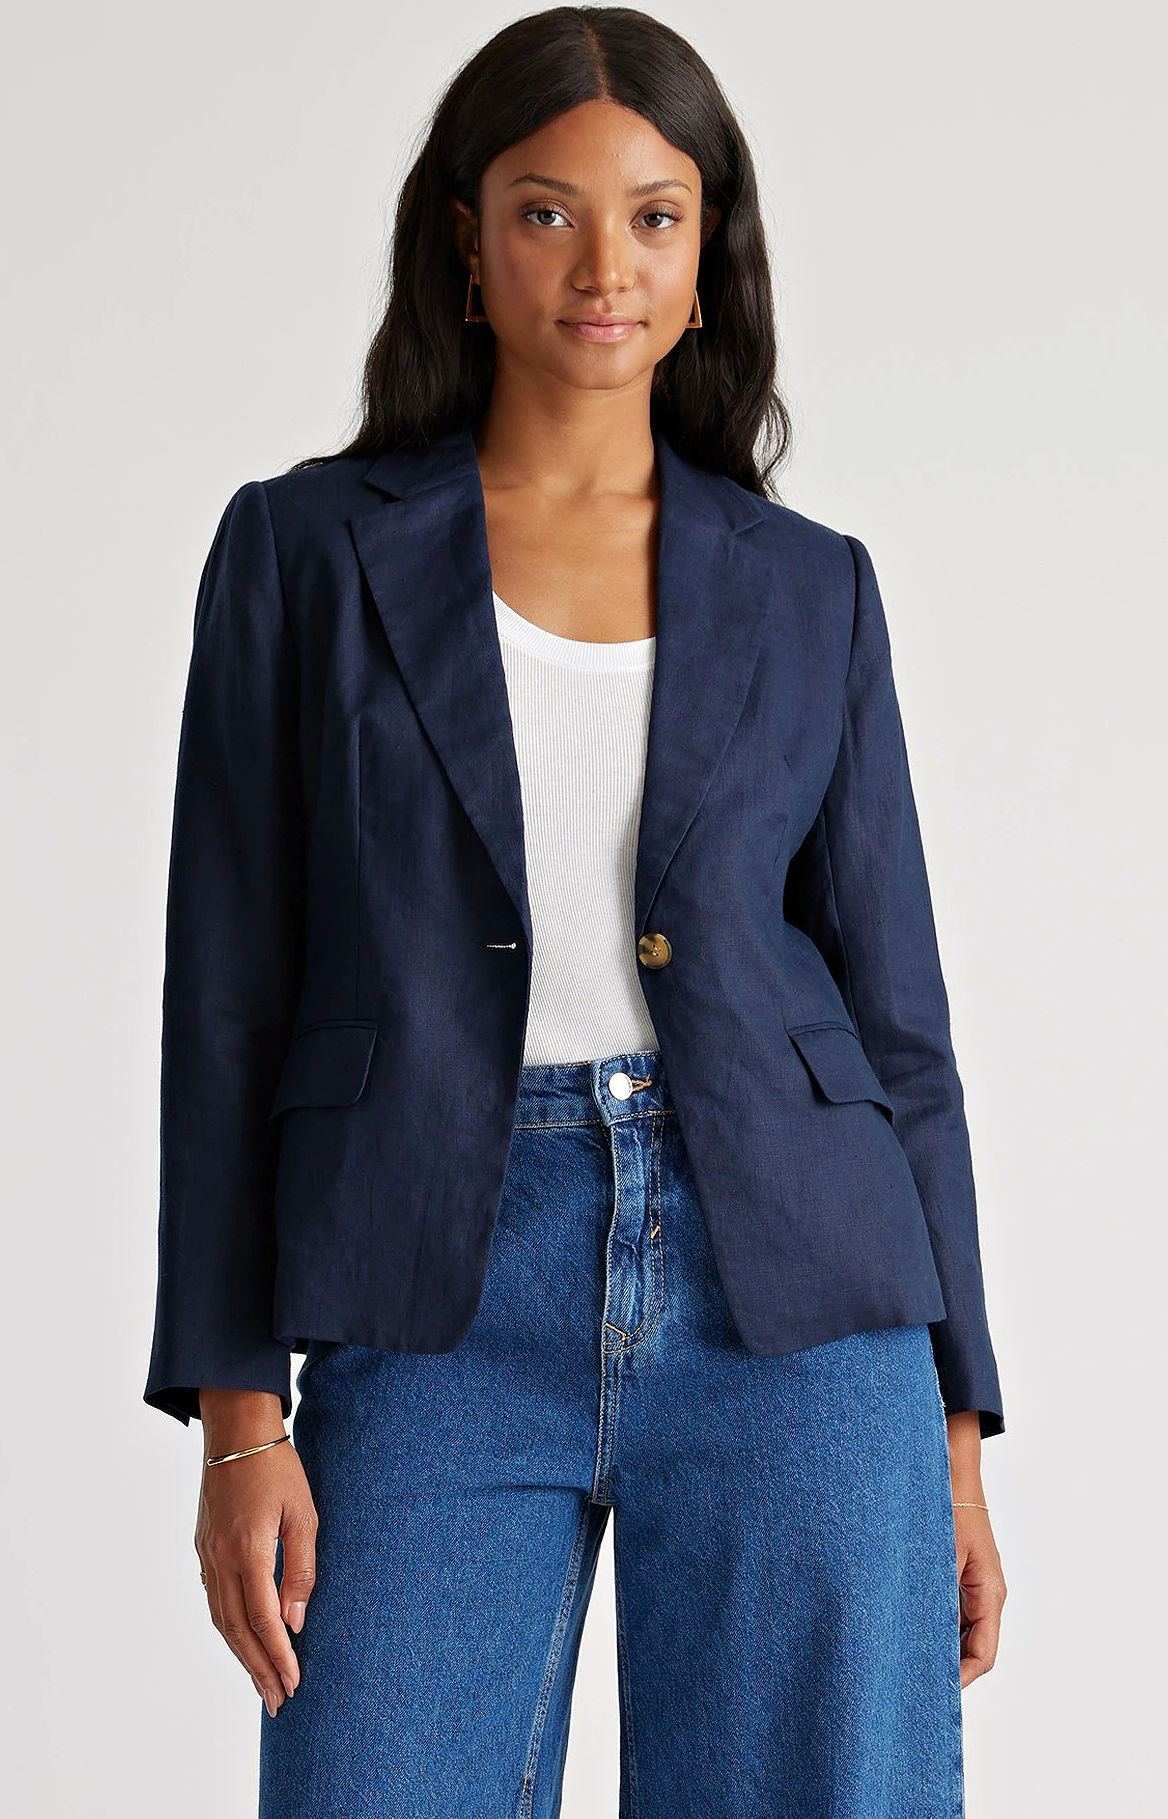 What’s the Best Linen Blazer for Travel? 13 Cute and Airy Picks